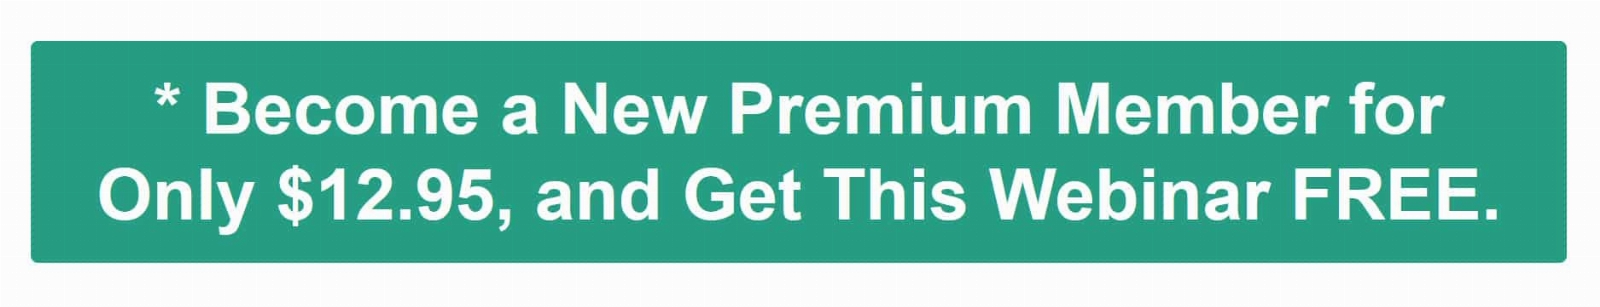 Special Offer Promo: Become a New Premium Member for Only $12.95, and Get This Webinar FREE. * New premium members only. Offer valid today and tomorrow only, January 30 & January 31, 2024. Sign up today!